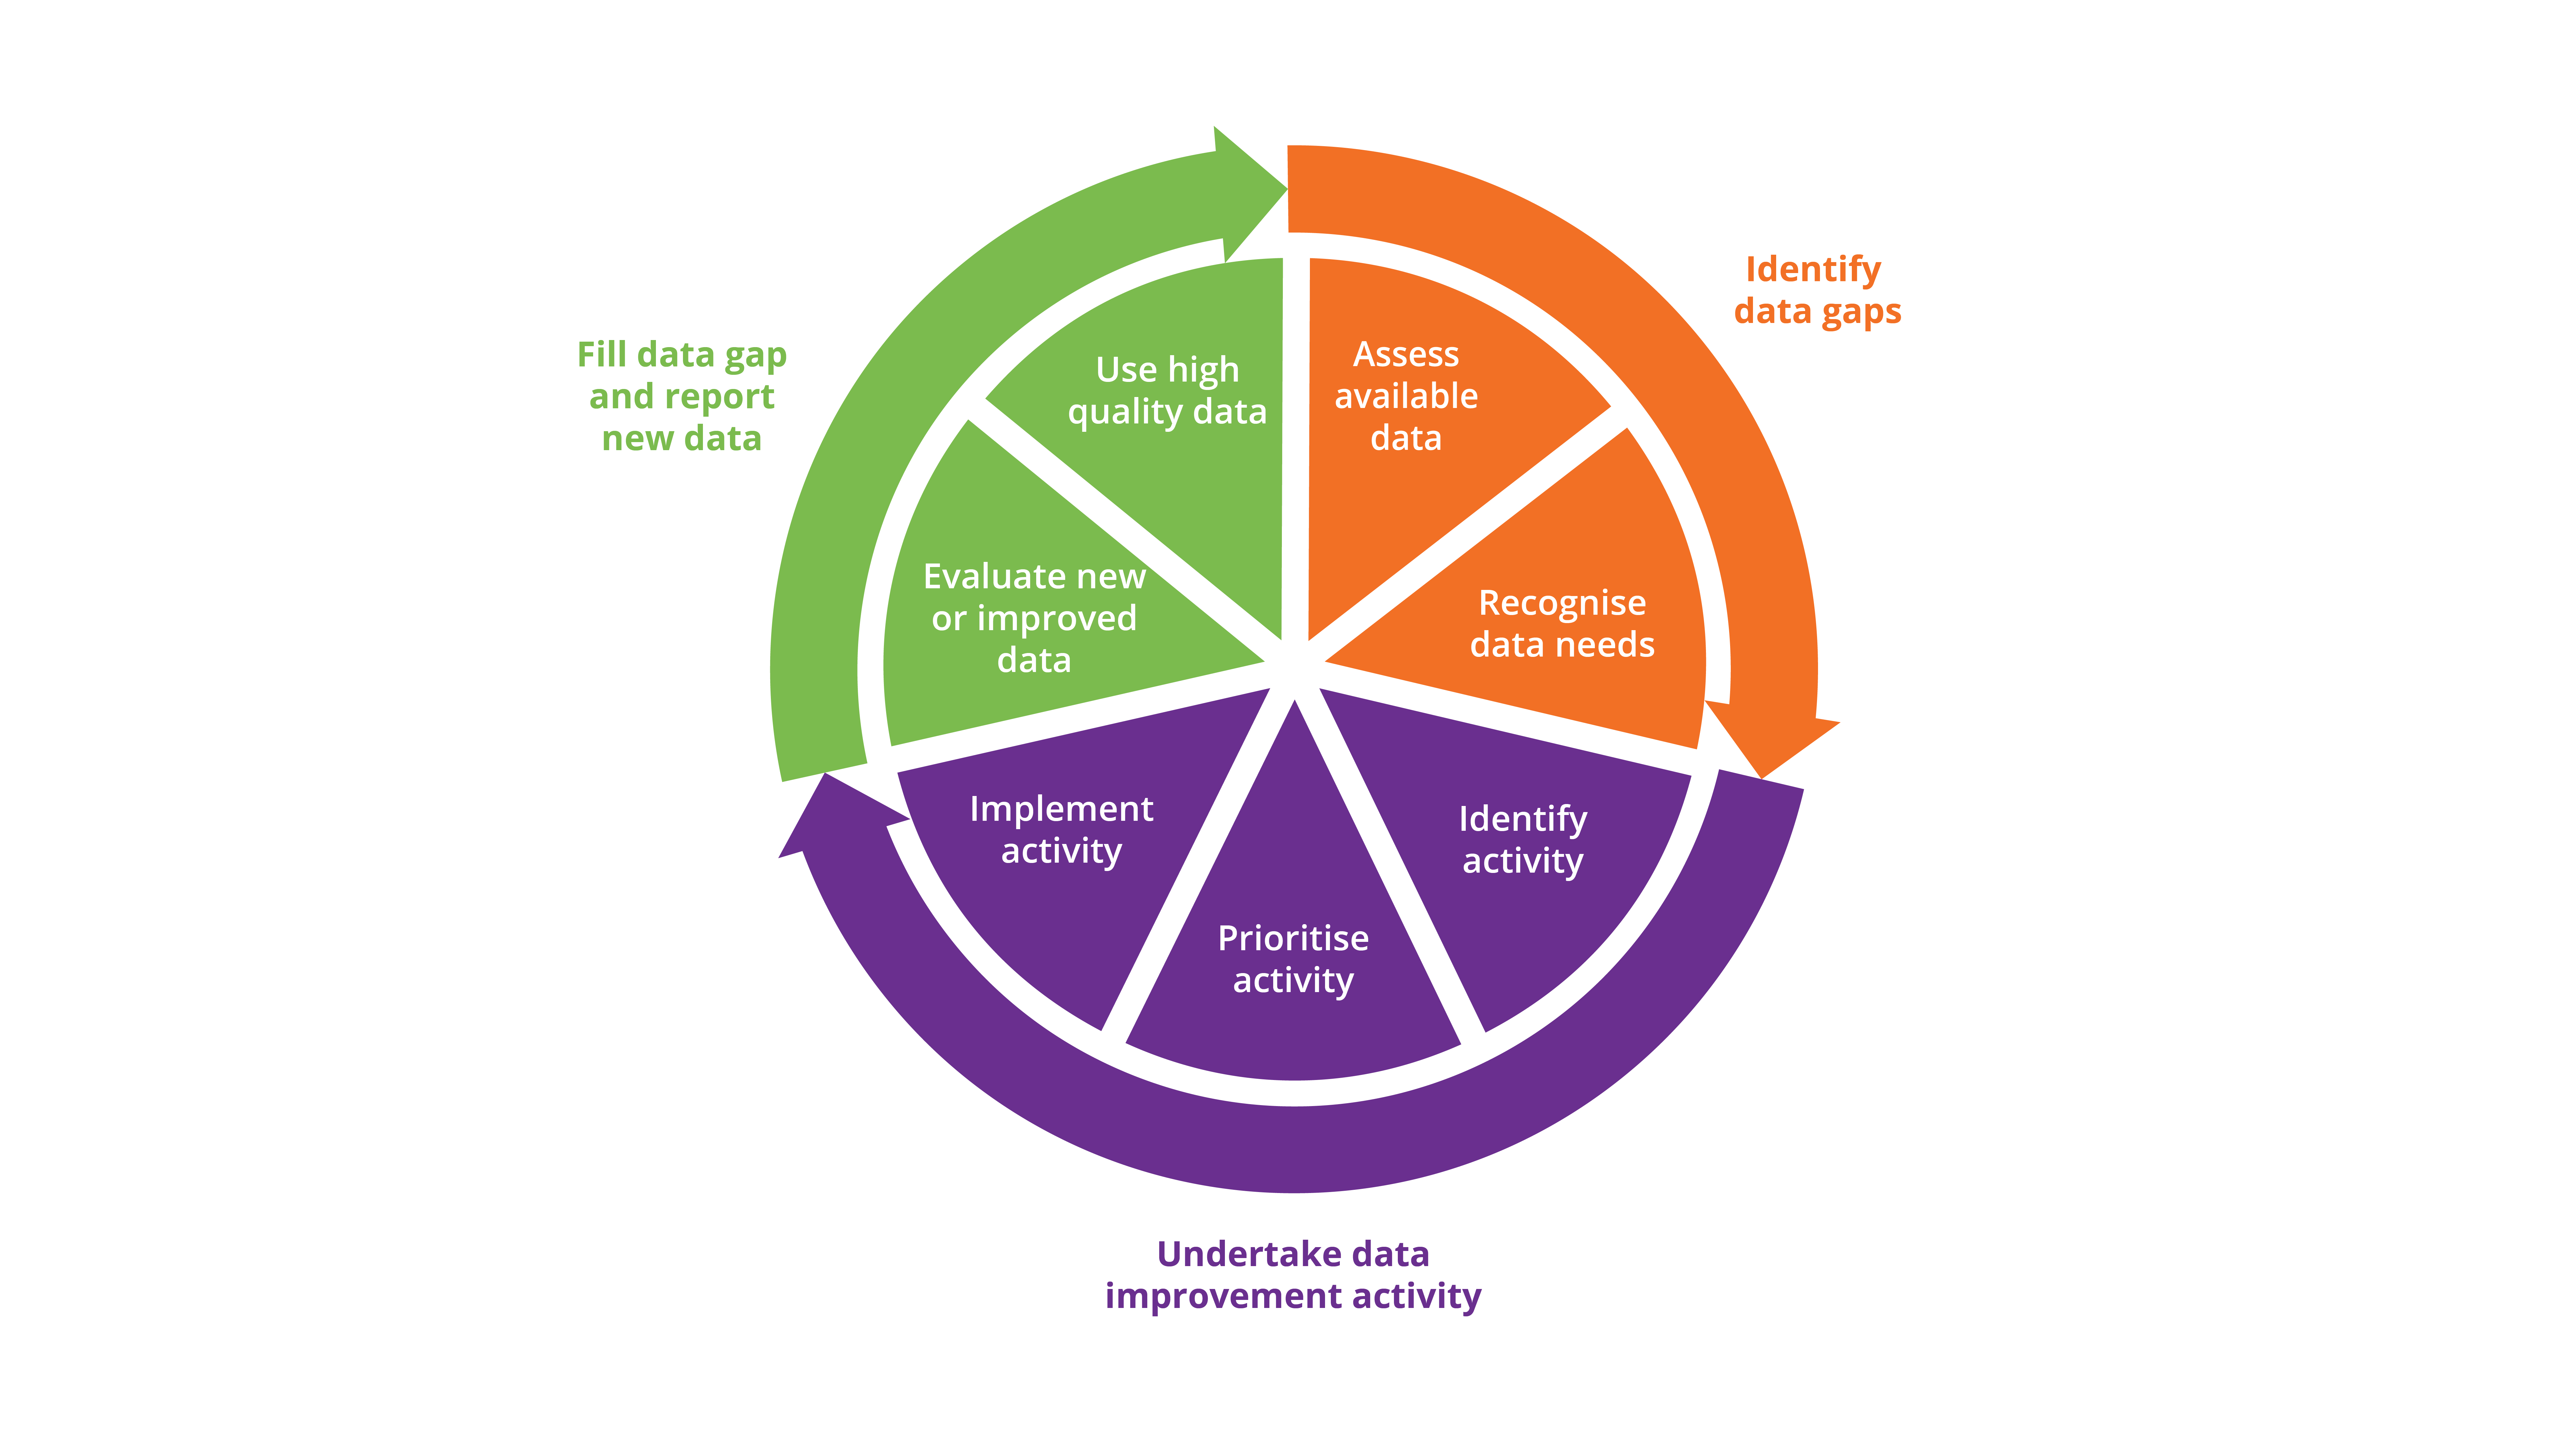 The data improvement cycle involves three stages – (1) identifying data gaps, (2) undertaking data improvement activities, and (3) filling the data gap and using the data for reporting purposes.